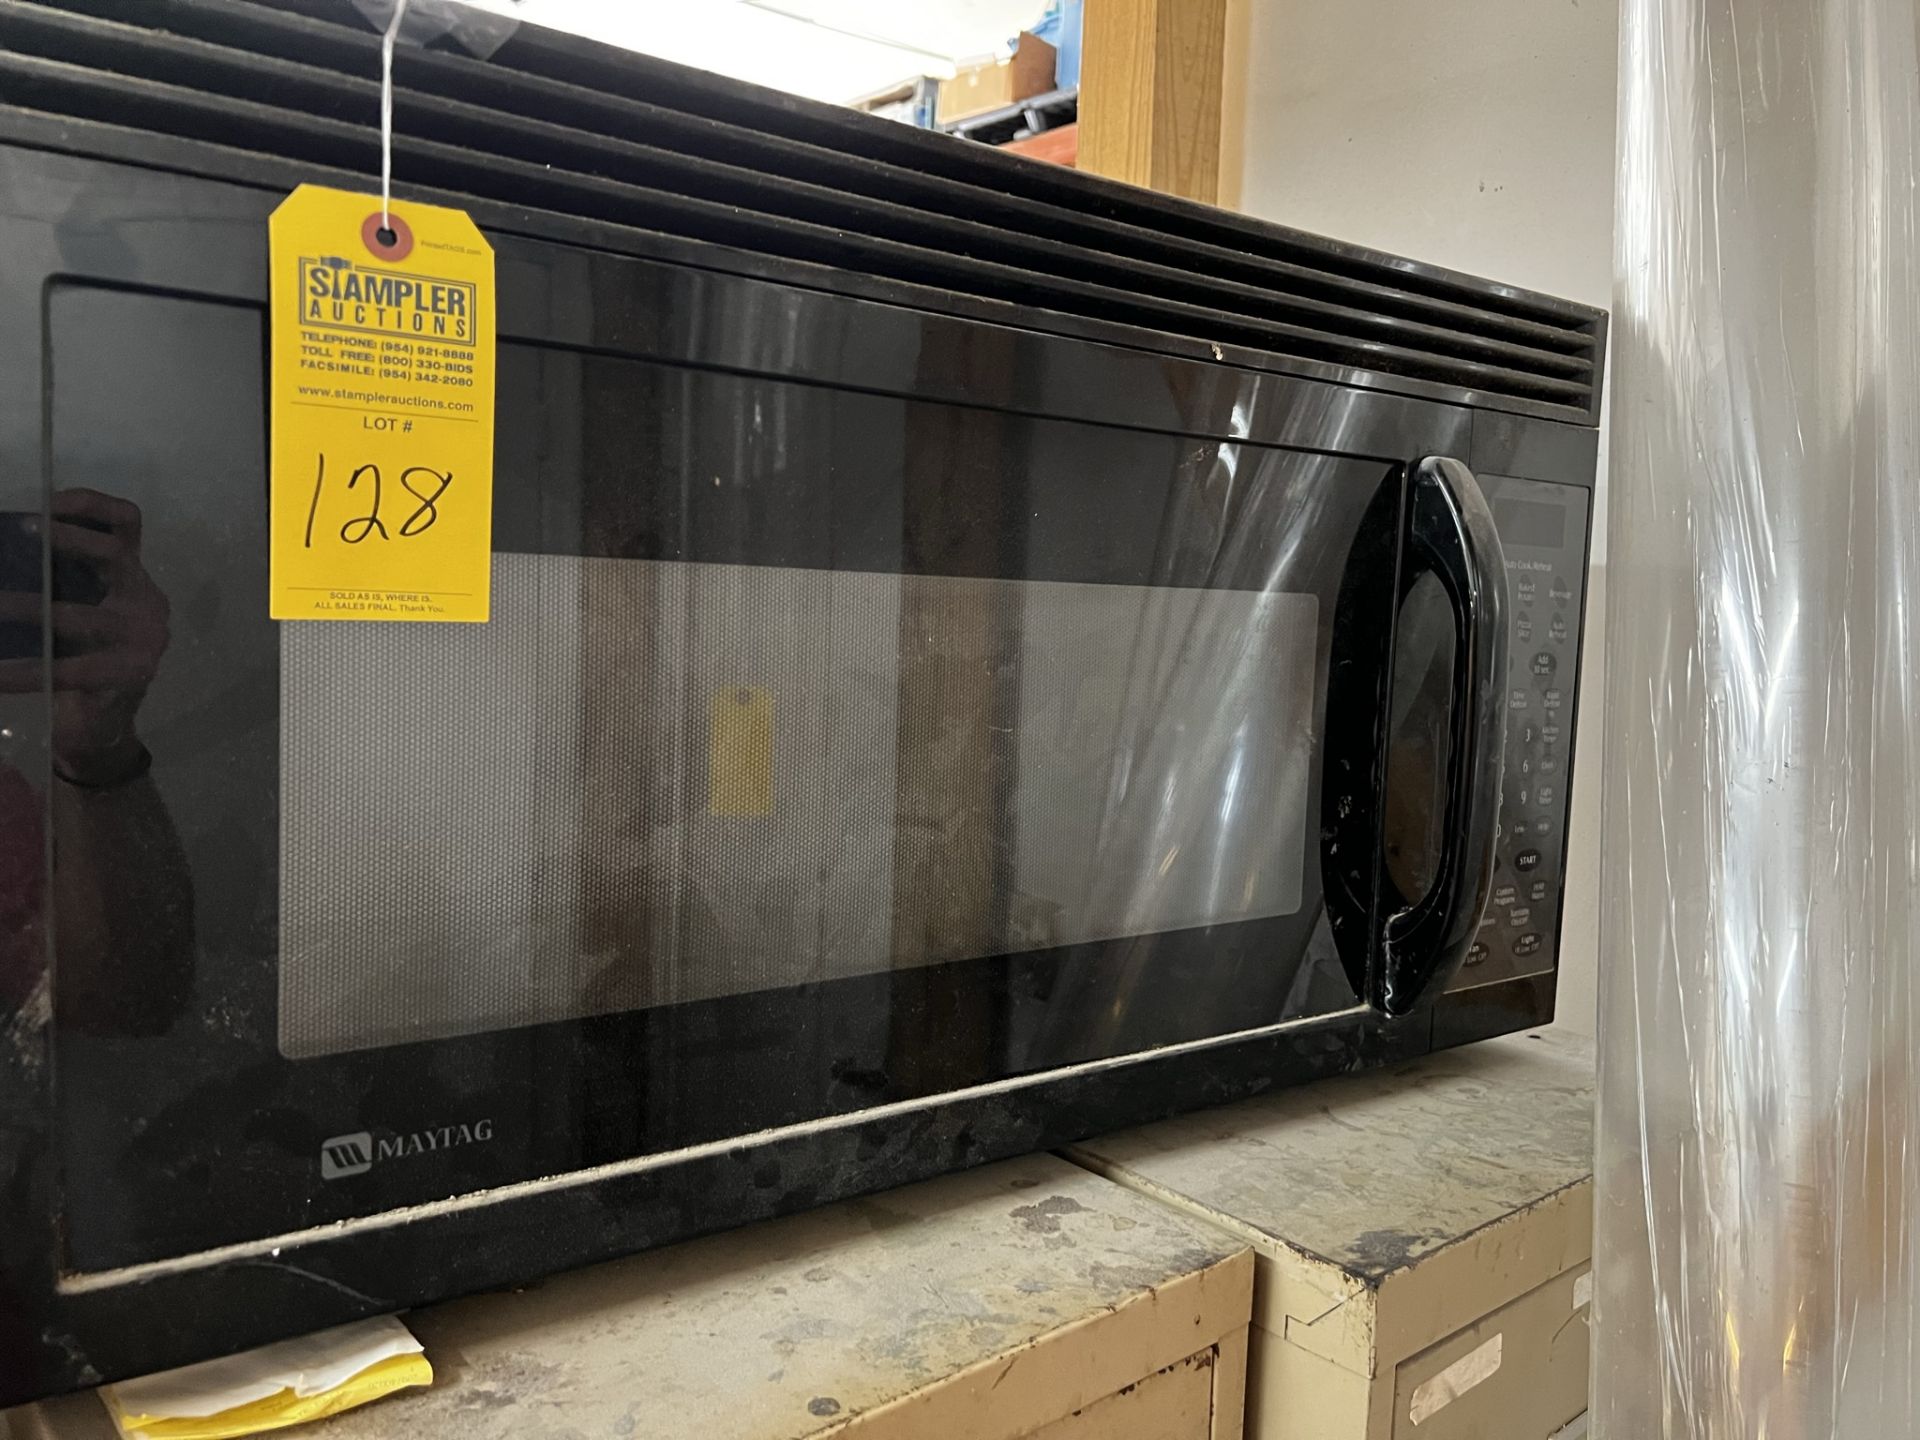 MAYTAG OVER THE RANGE BLACK MICROWAVE (LOCATED IN WEST PALM BEACH, FL)